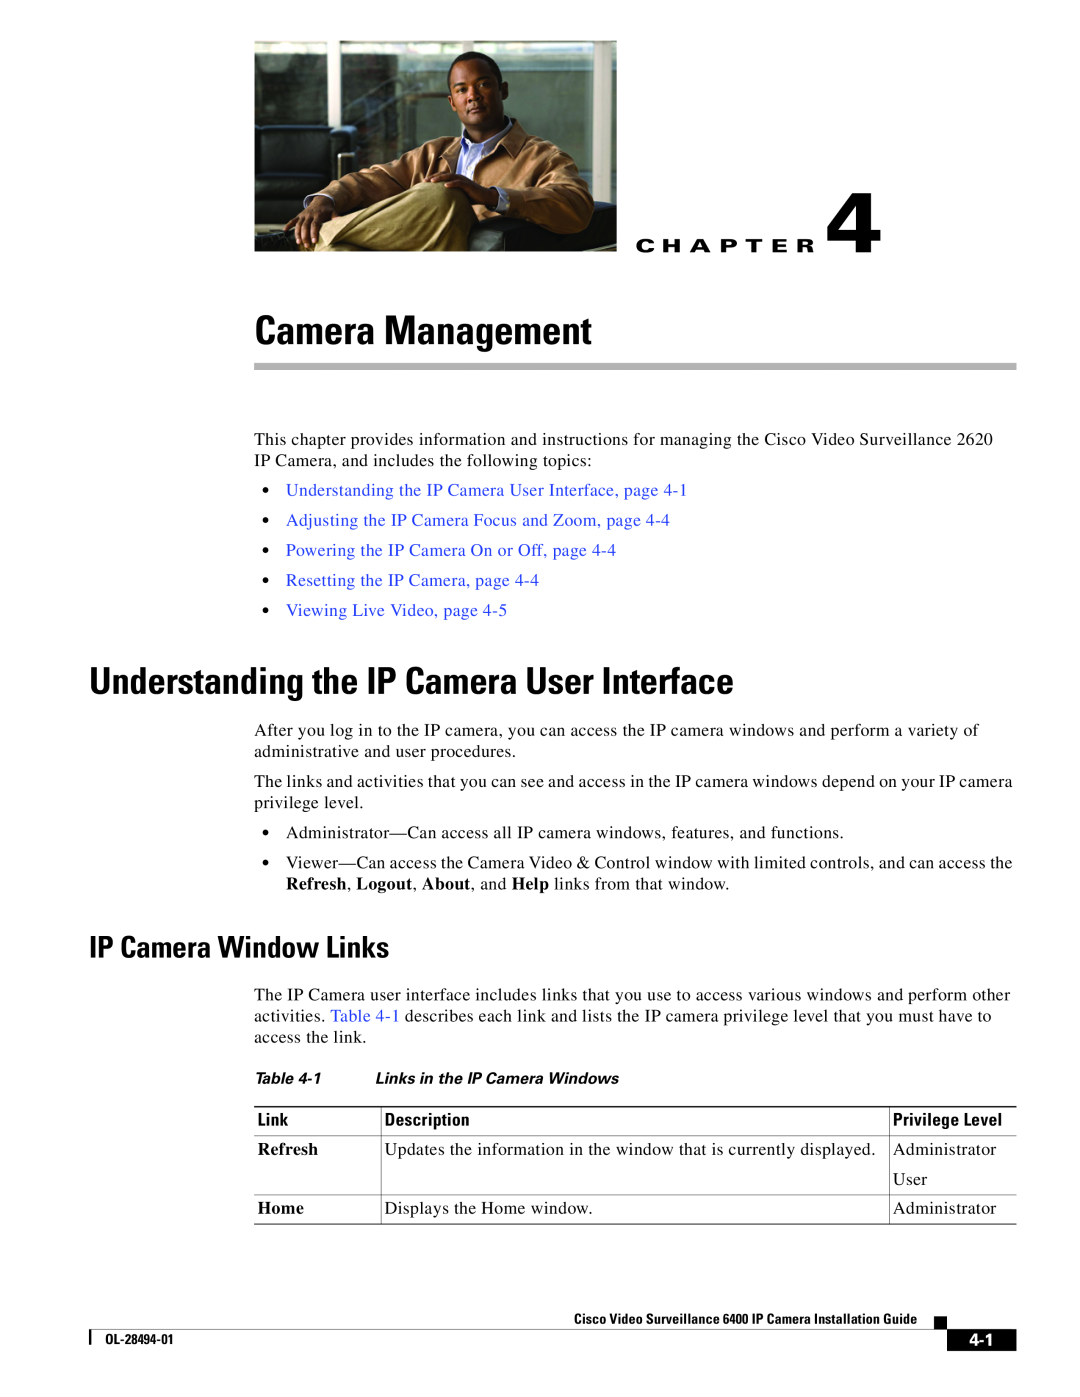 Cisco Systems 6400 Camera Management, Understanding the IP Camera User Interface, IP Camera Window Links, C H A P T E R 